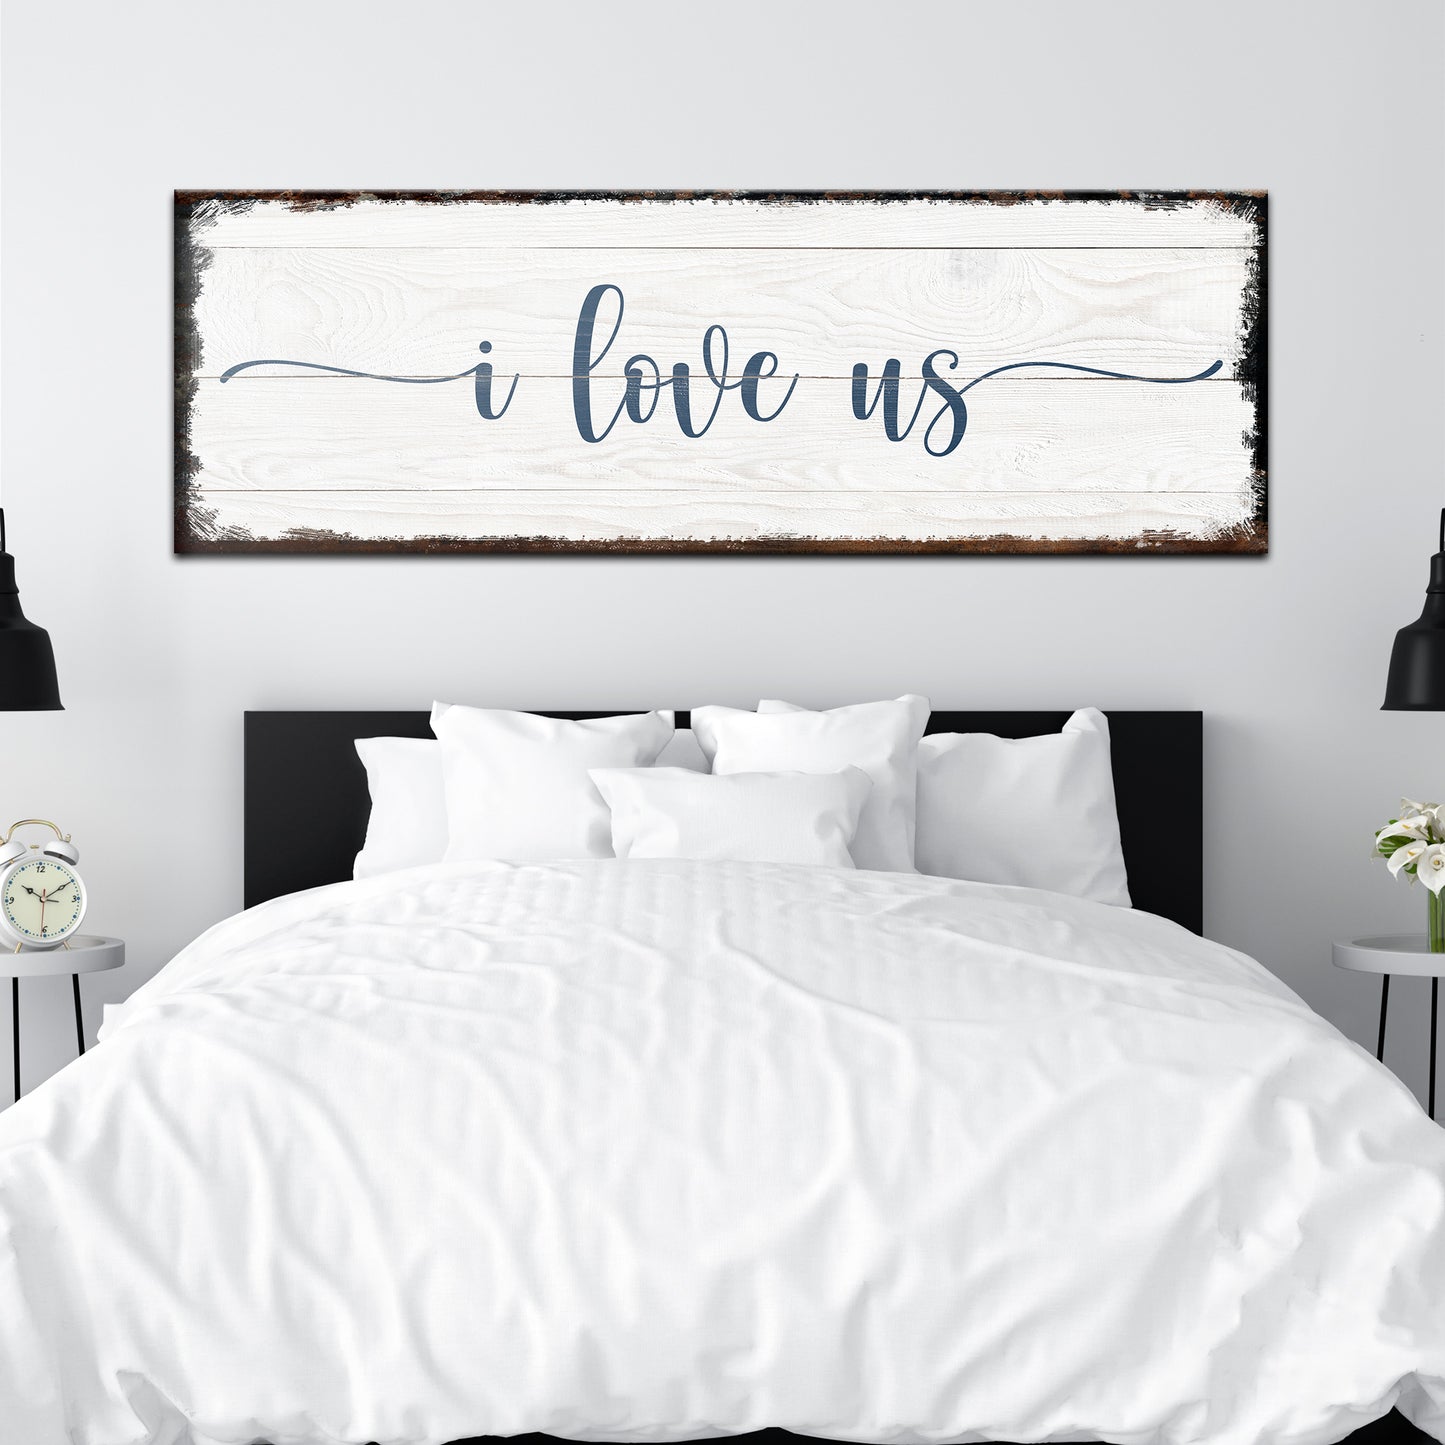 I Love Us Sign - Image by Tailored Canvases